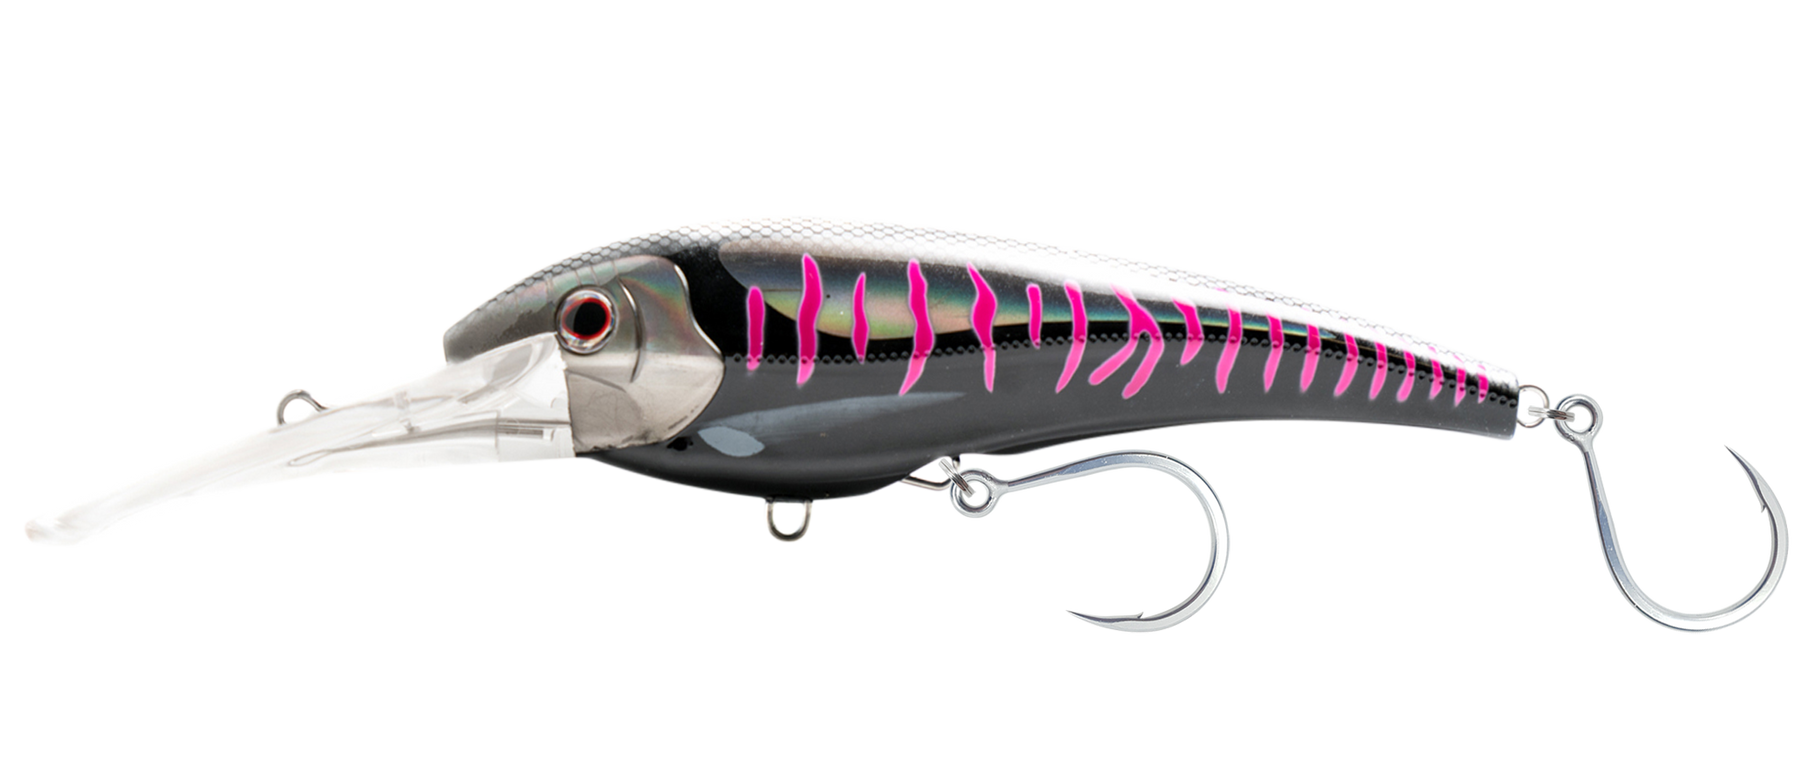 Nomad DTX Minnow Heavy Duty Shallow Floating